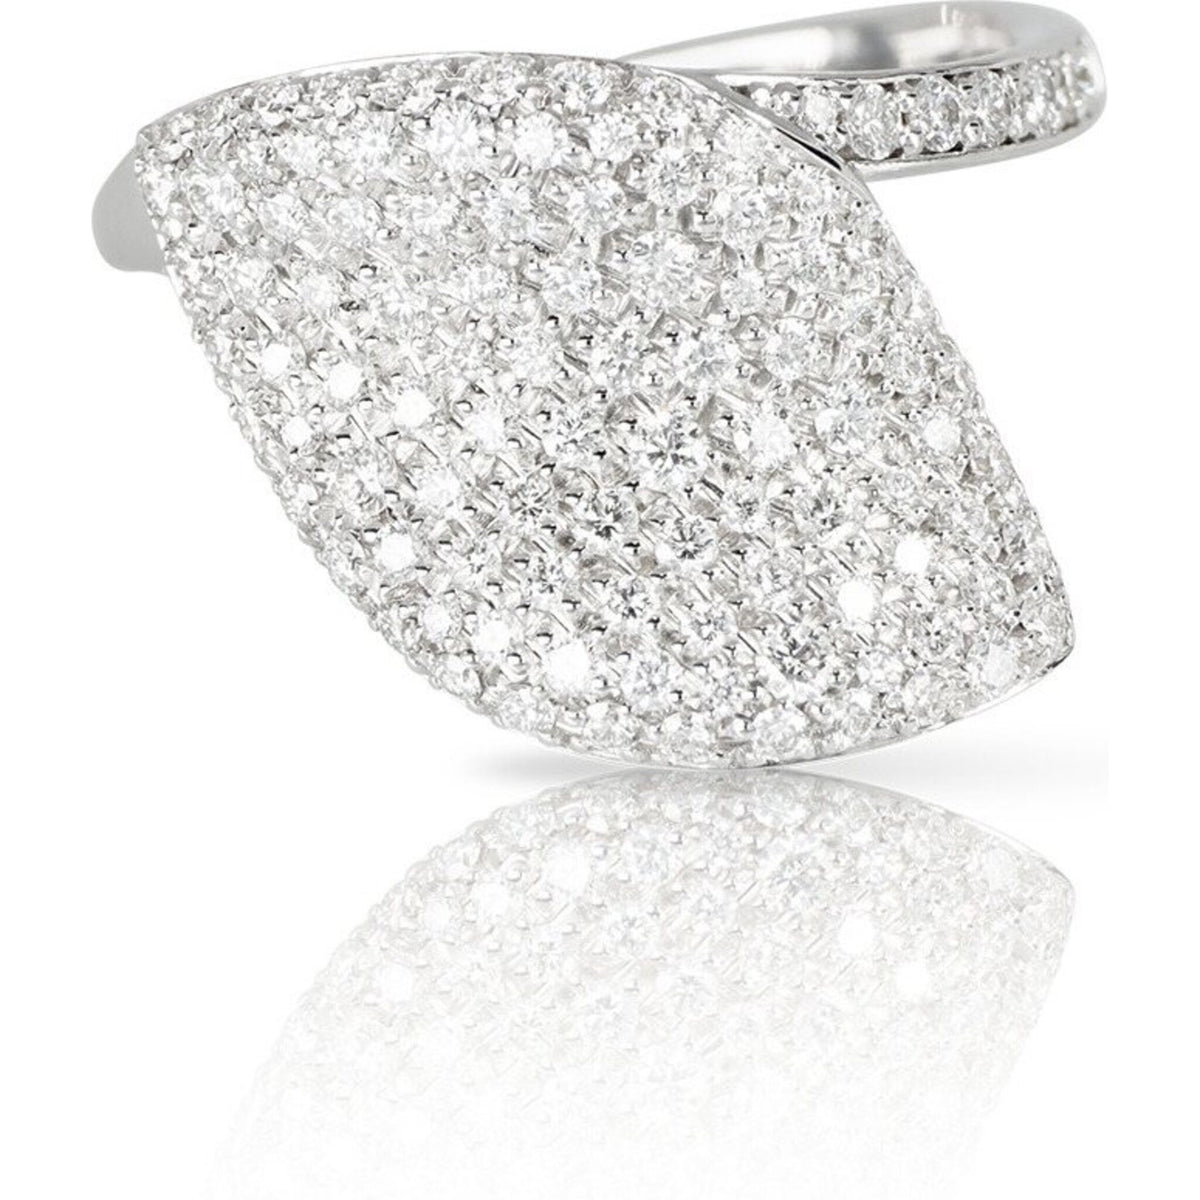 Pasquale Bruni - Aleluiá Ring in 18k White Gold with White Diamonds